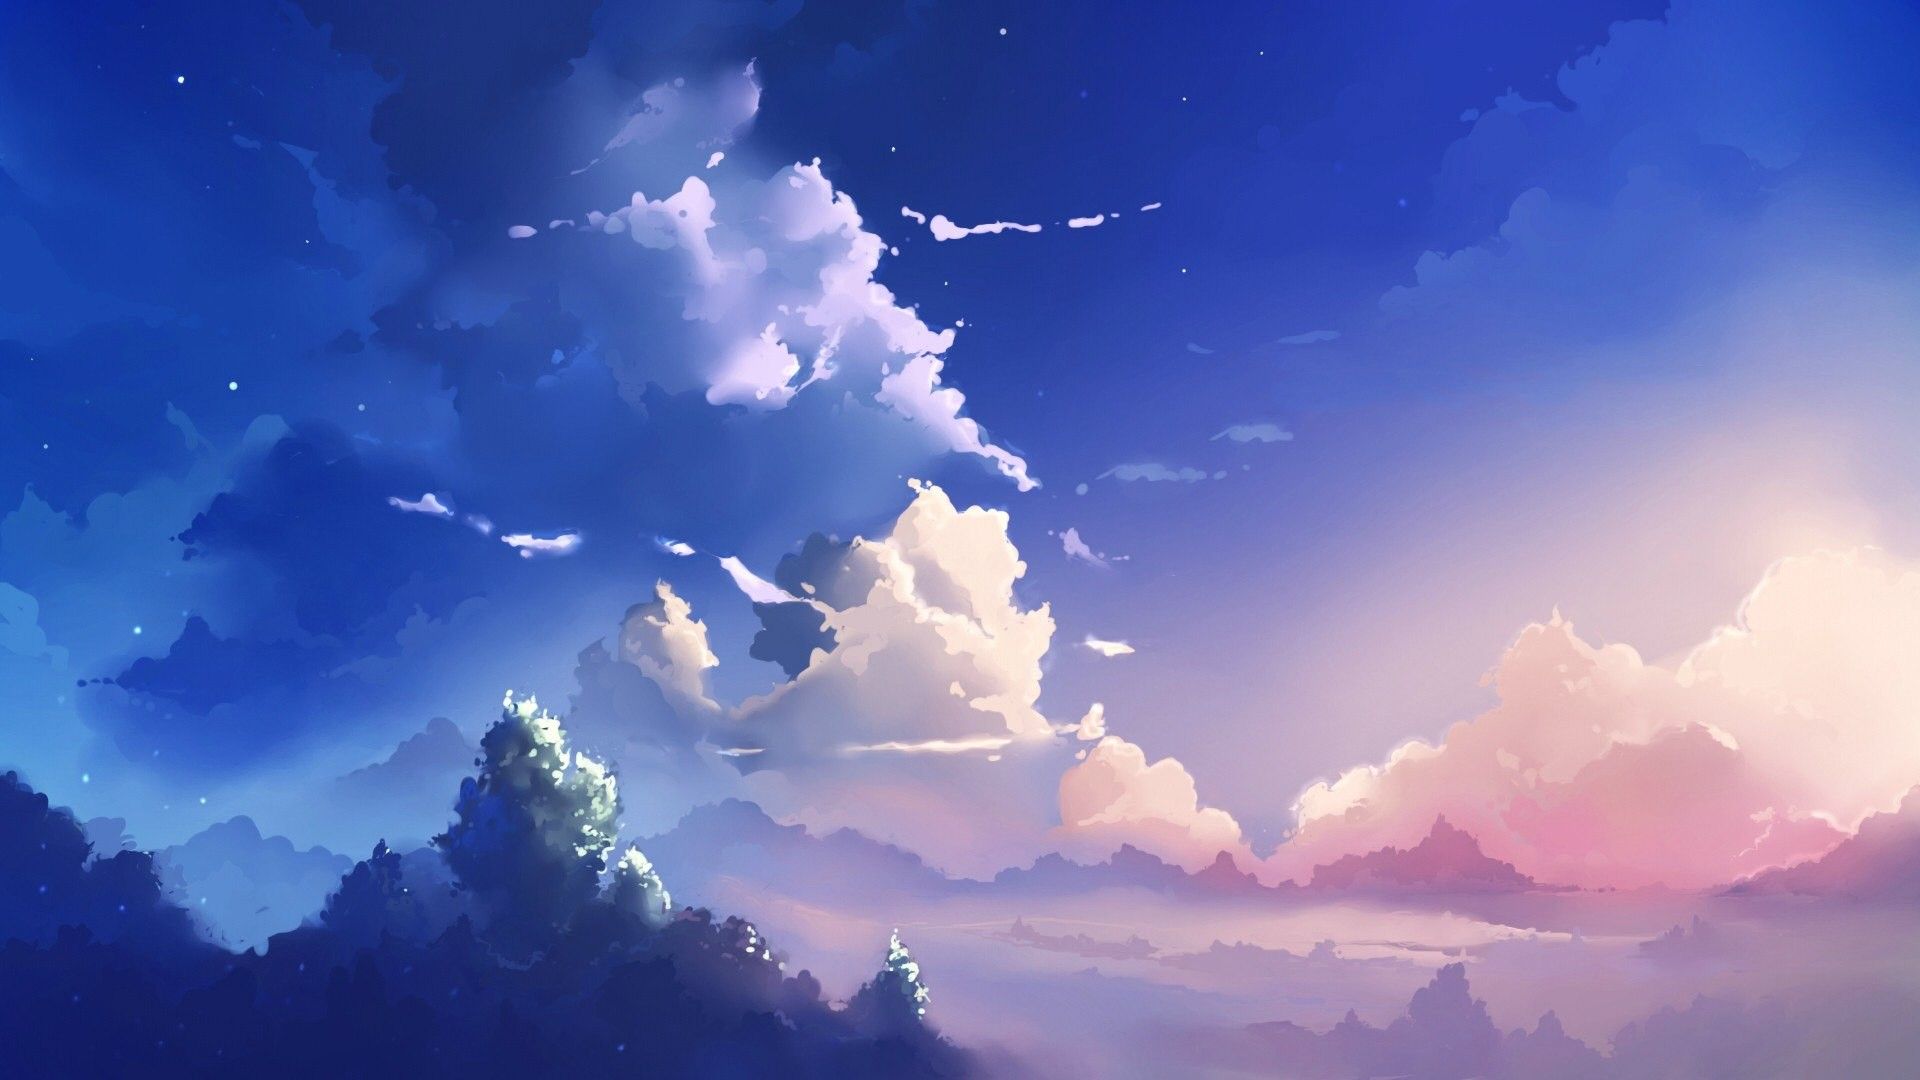 Wallpaper Anime Anime Art Art Cloud Atmosphere Background  Download  Free Image